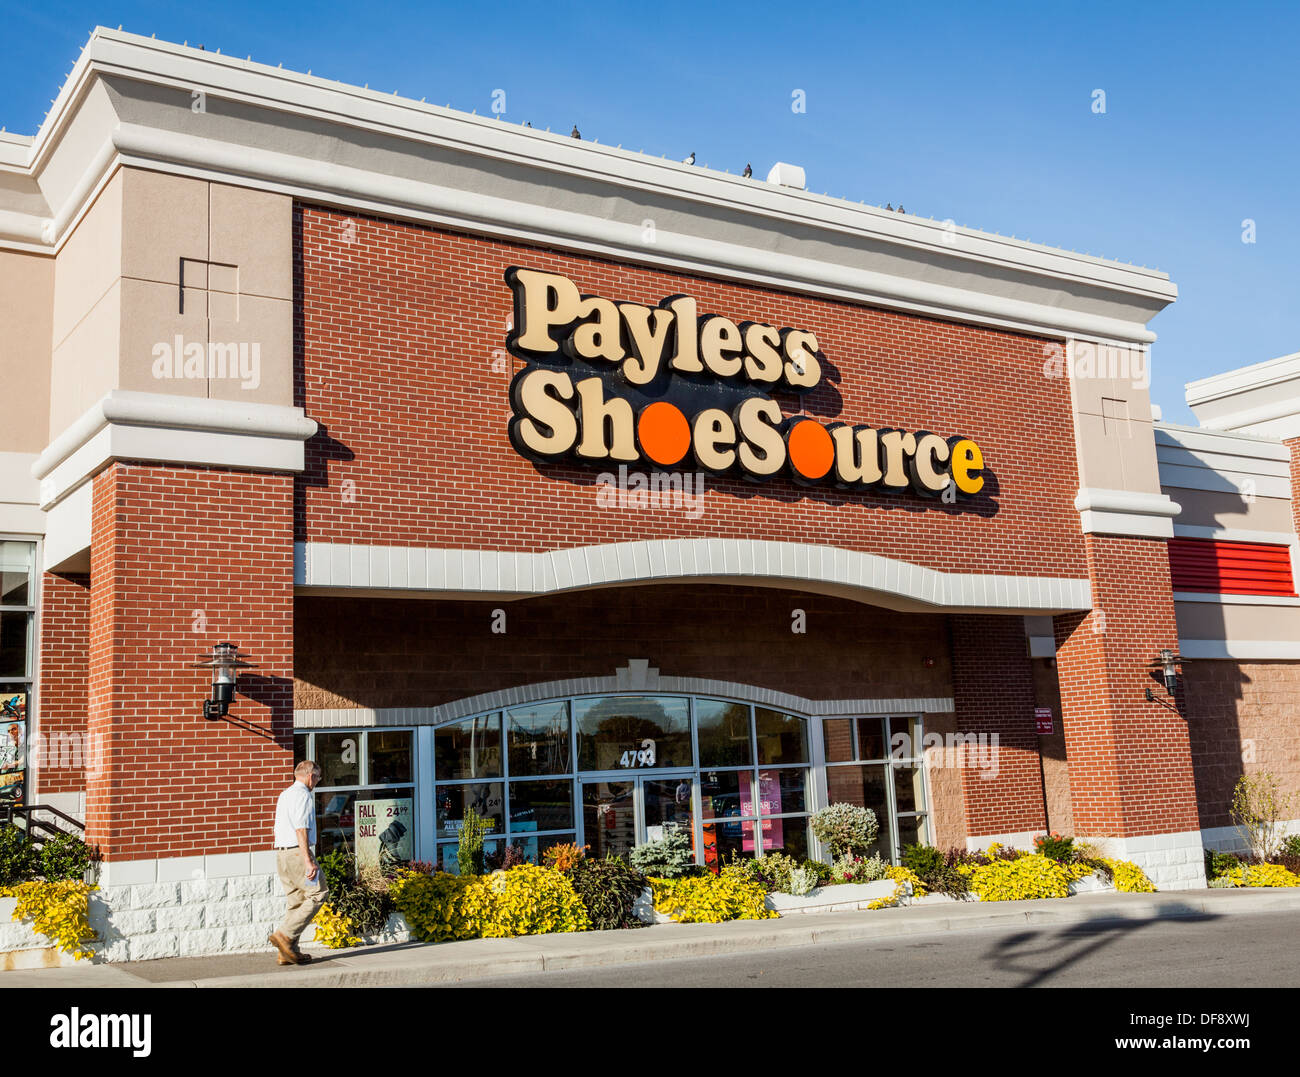 Payless Shoe Source, discounter, box store, this one in Utica, New York State Stock Photo